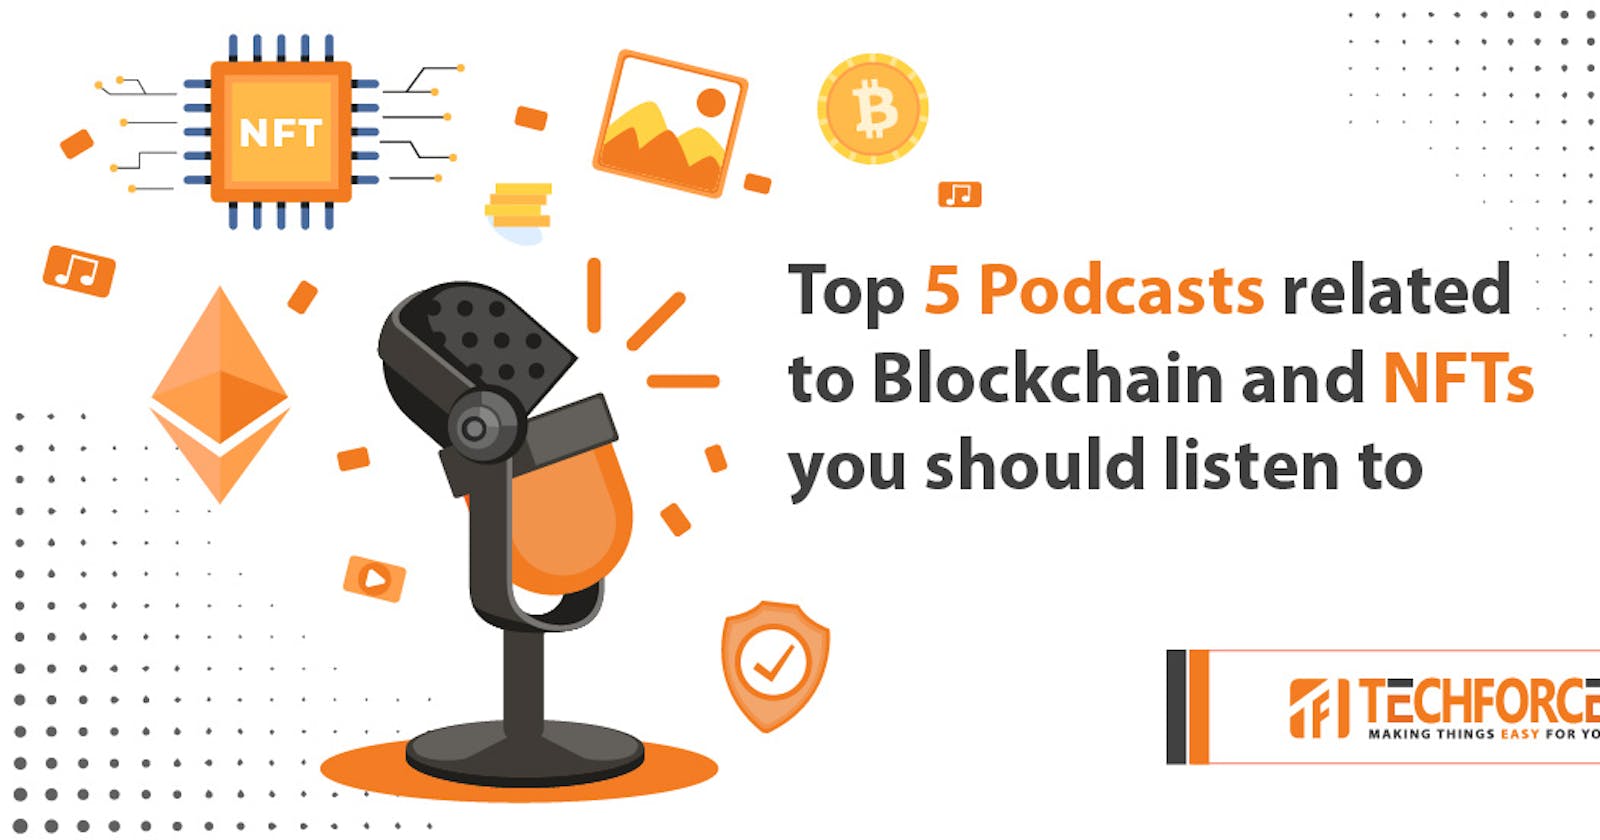 Top 5 Podcasts related to Blockchain and NFTs you should listen to